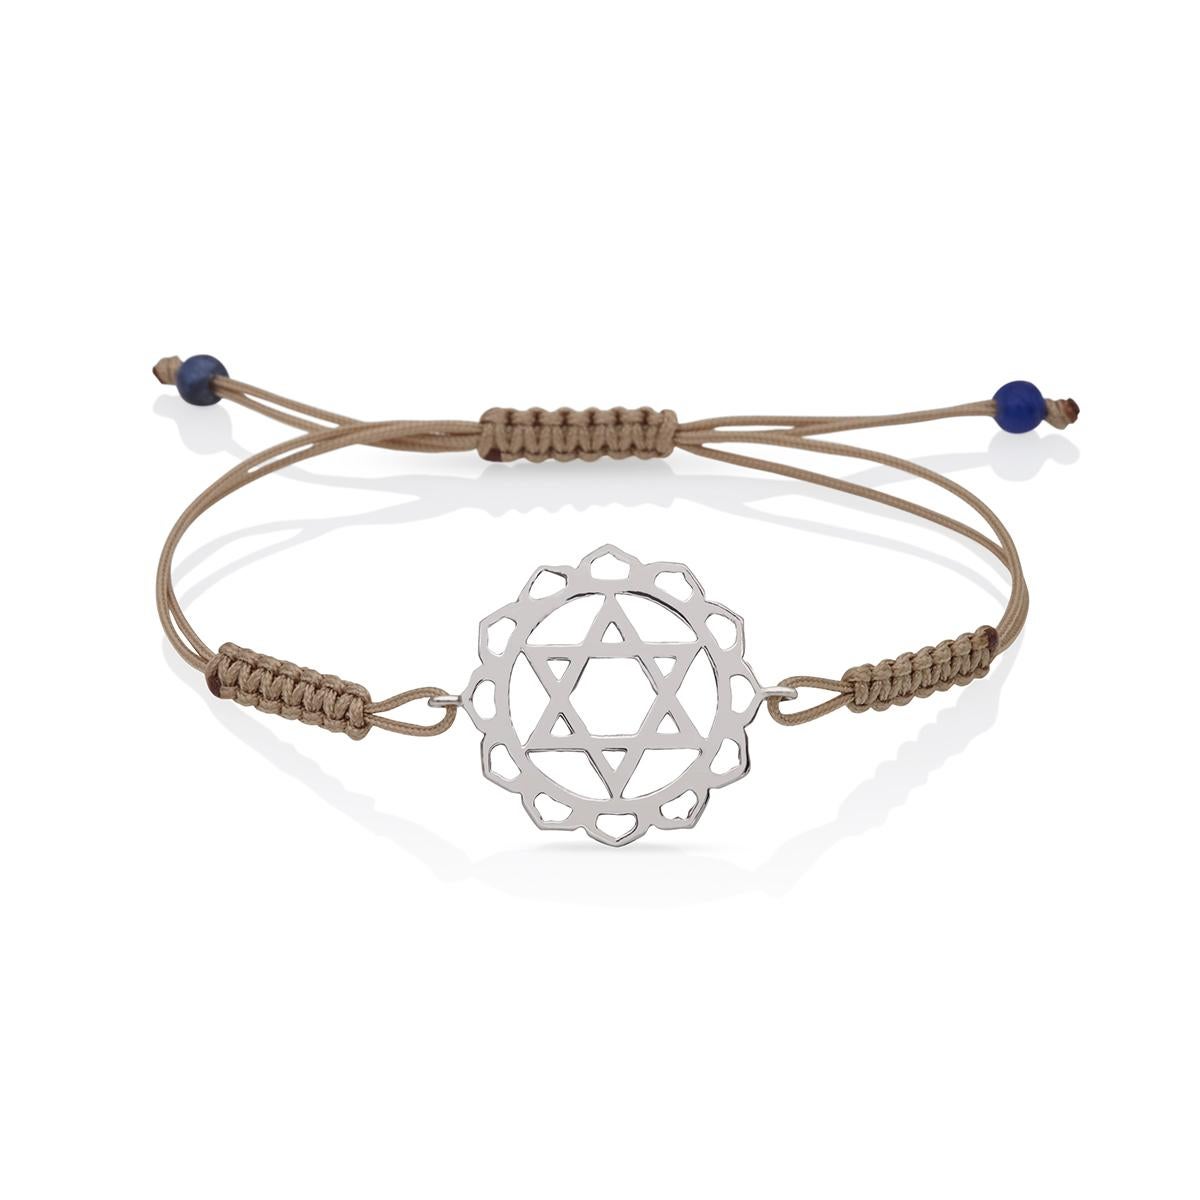 Macrame brown Cord Yoga Bracelet with the Anahata Heart Chakra in 14 Kt white Gold with Lapis Lazuli .
A very beautiful and wearable macrame bracelet made of 14Kt Gold with the Anahata Heart Chakra. It will match with everything in your closet.